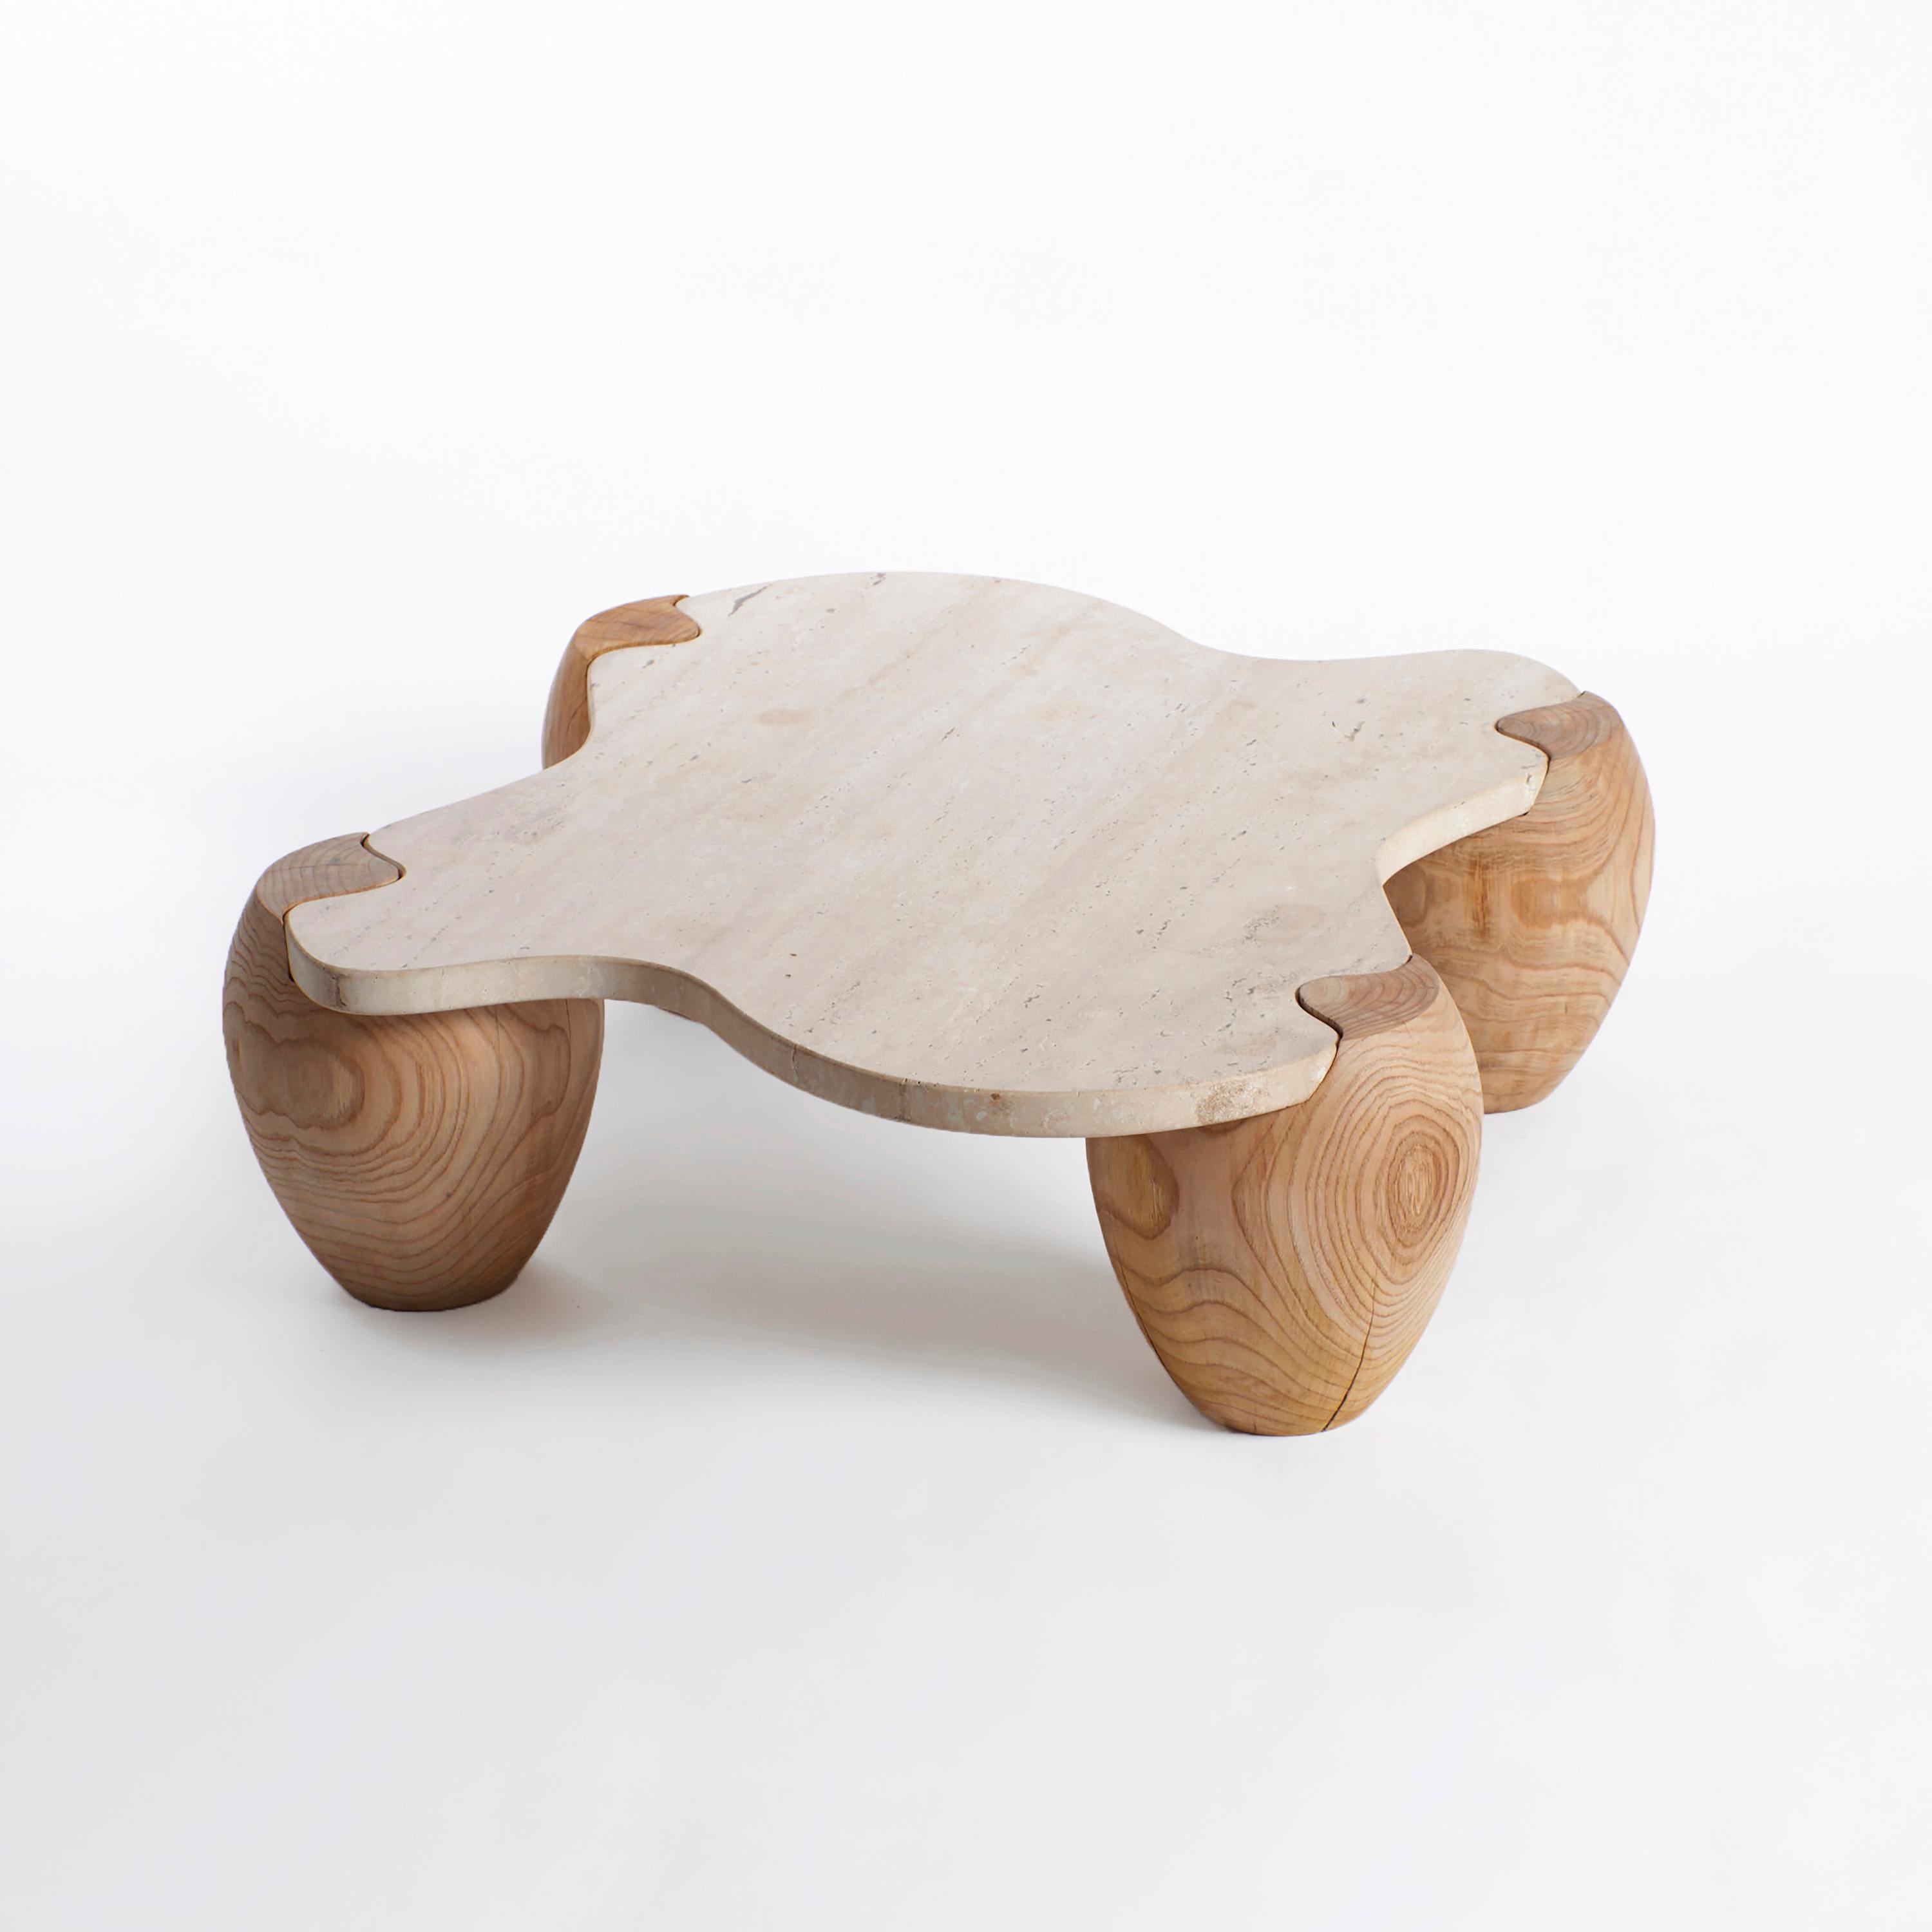 Alentejo coffee table.
Designed by Project 213A in 2022.
Made to order.
This organic-shaped coffee table stands is made from Travertine and assembles like a puzzle onto the four wooden legs. Each legs is made from solid chestnut wood and is